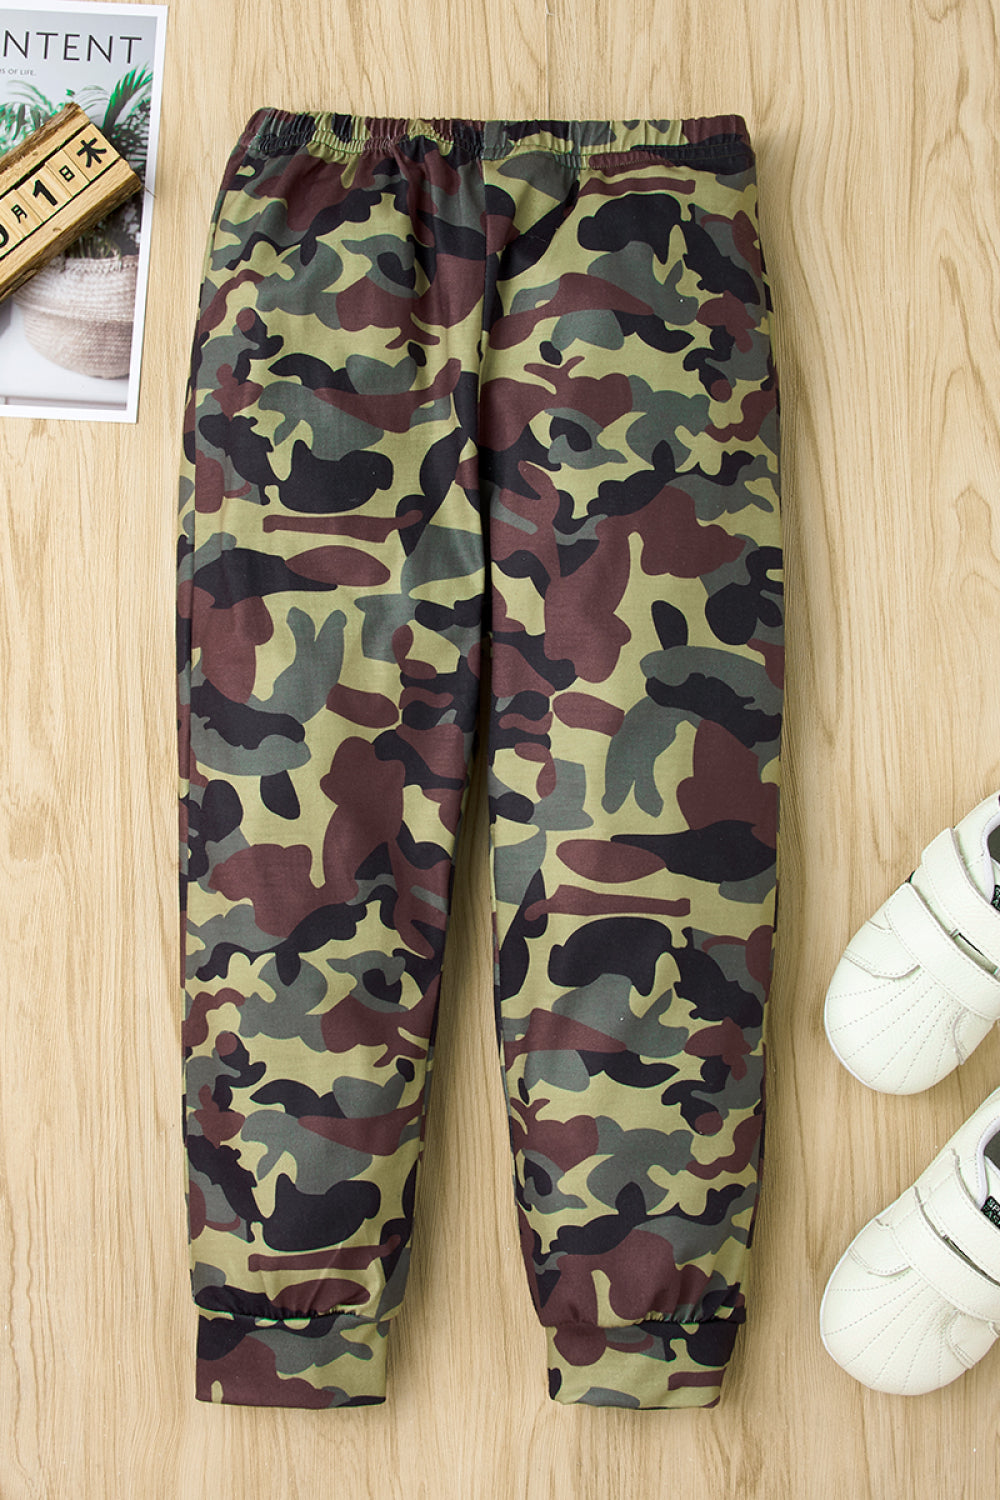 Boys Letter Print Camouflage Hoodie and Pants Set